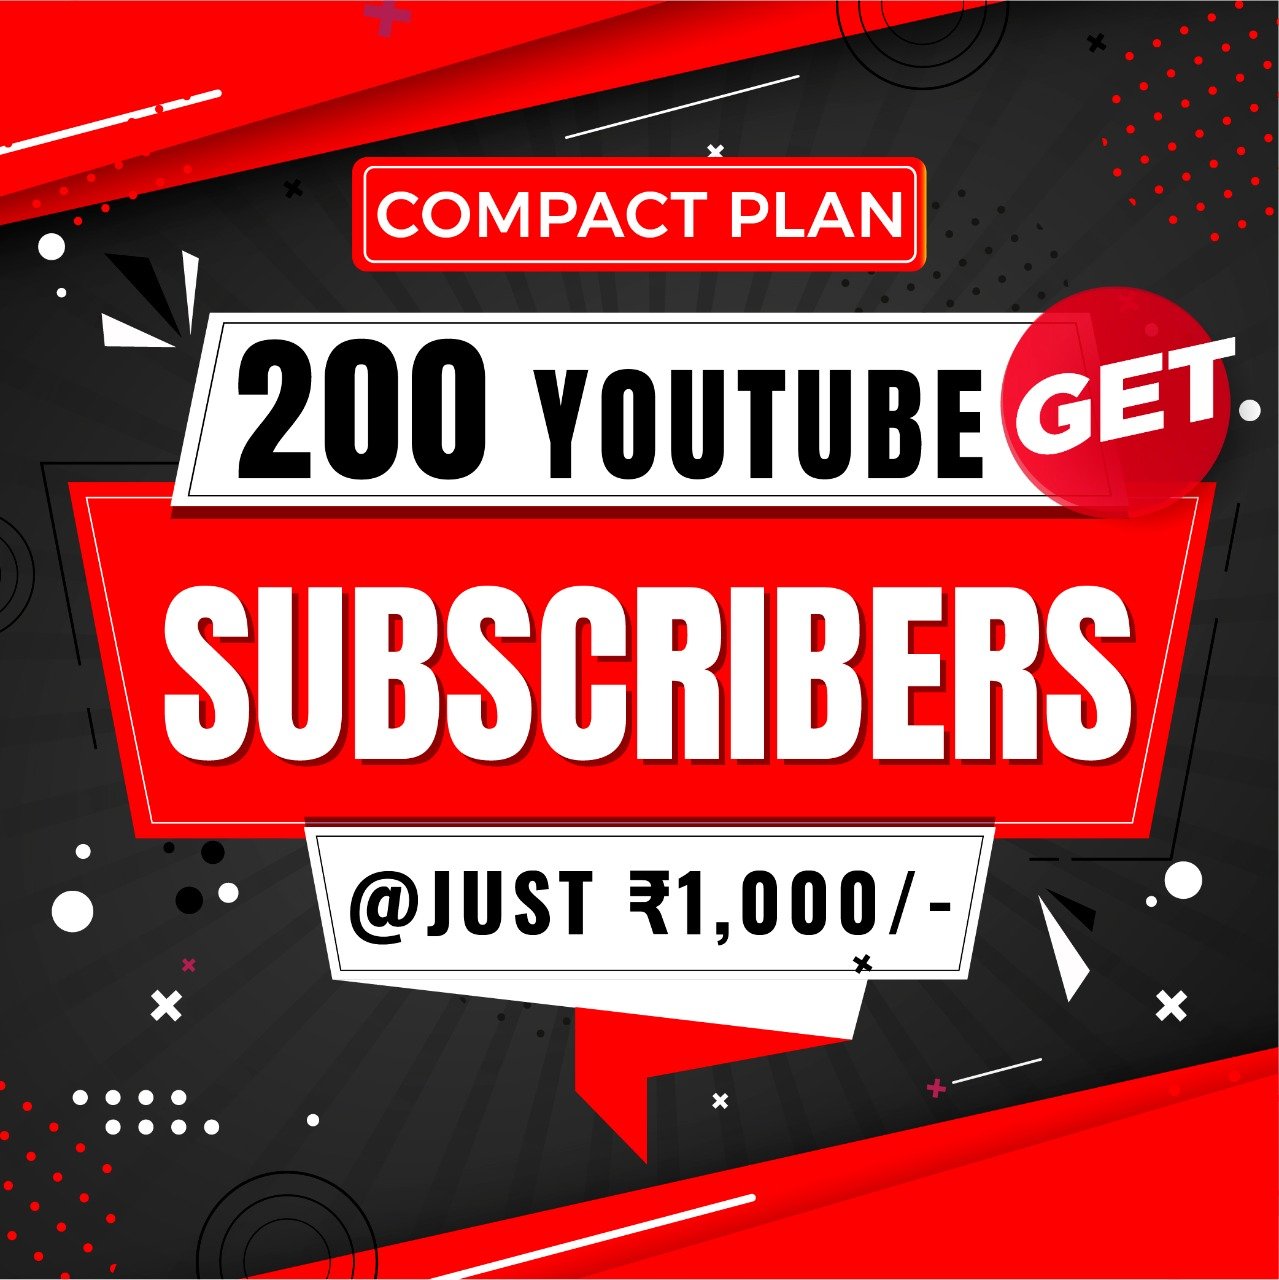 Get 200 YouTube Subscribers